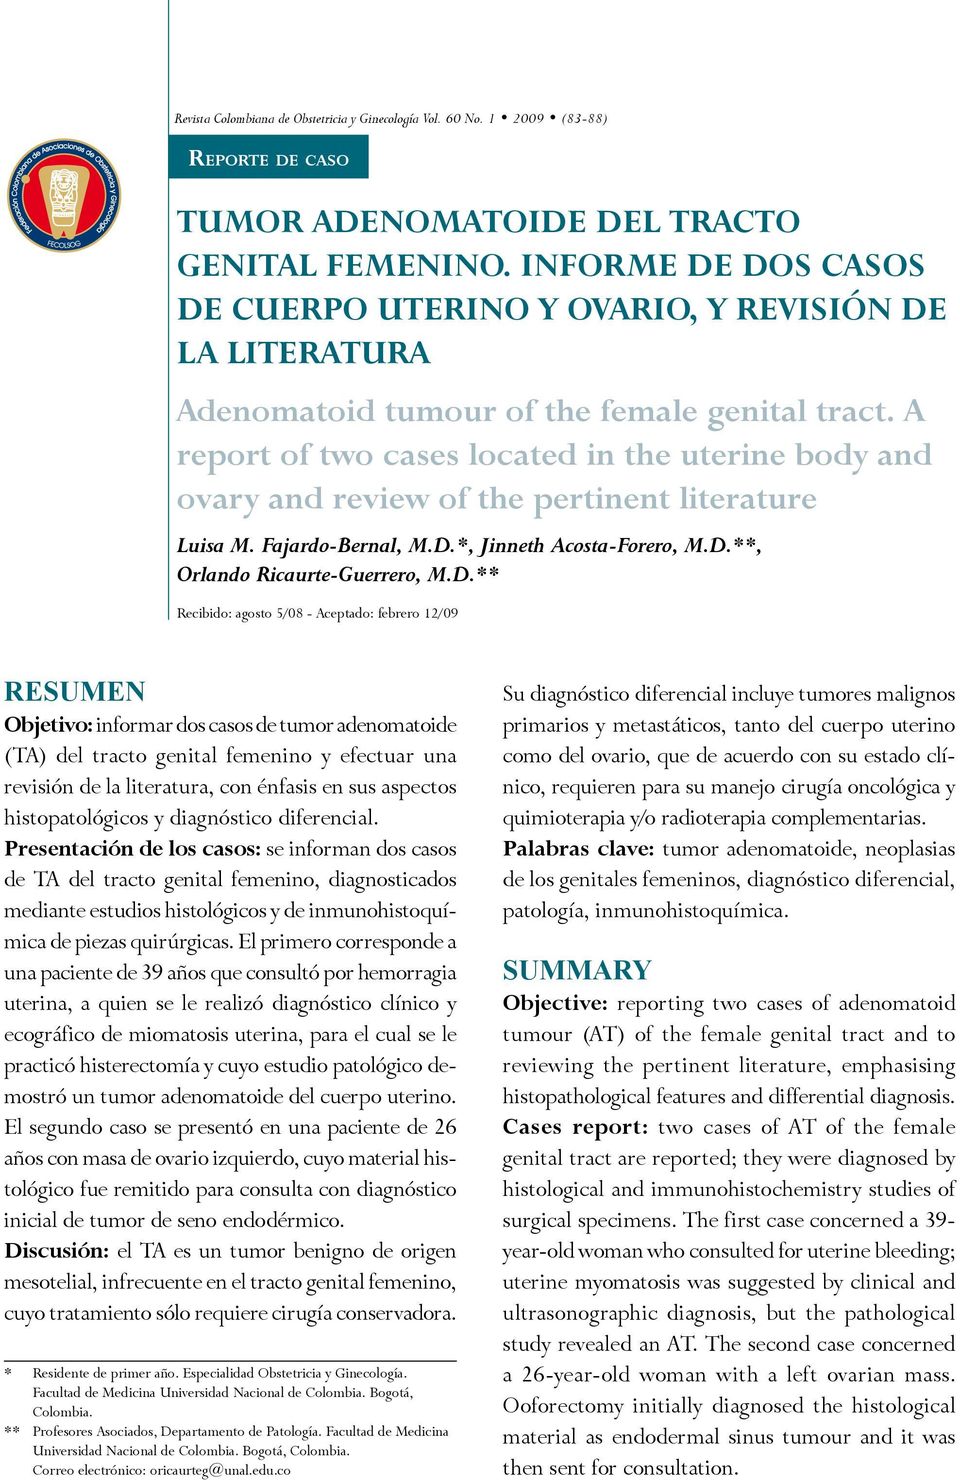 A report of two cases located in the uterine body and ovary and review of the pertinent literature Luisa M. Fajardo-Bernal, M.D.